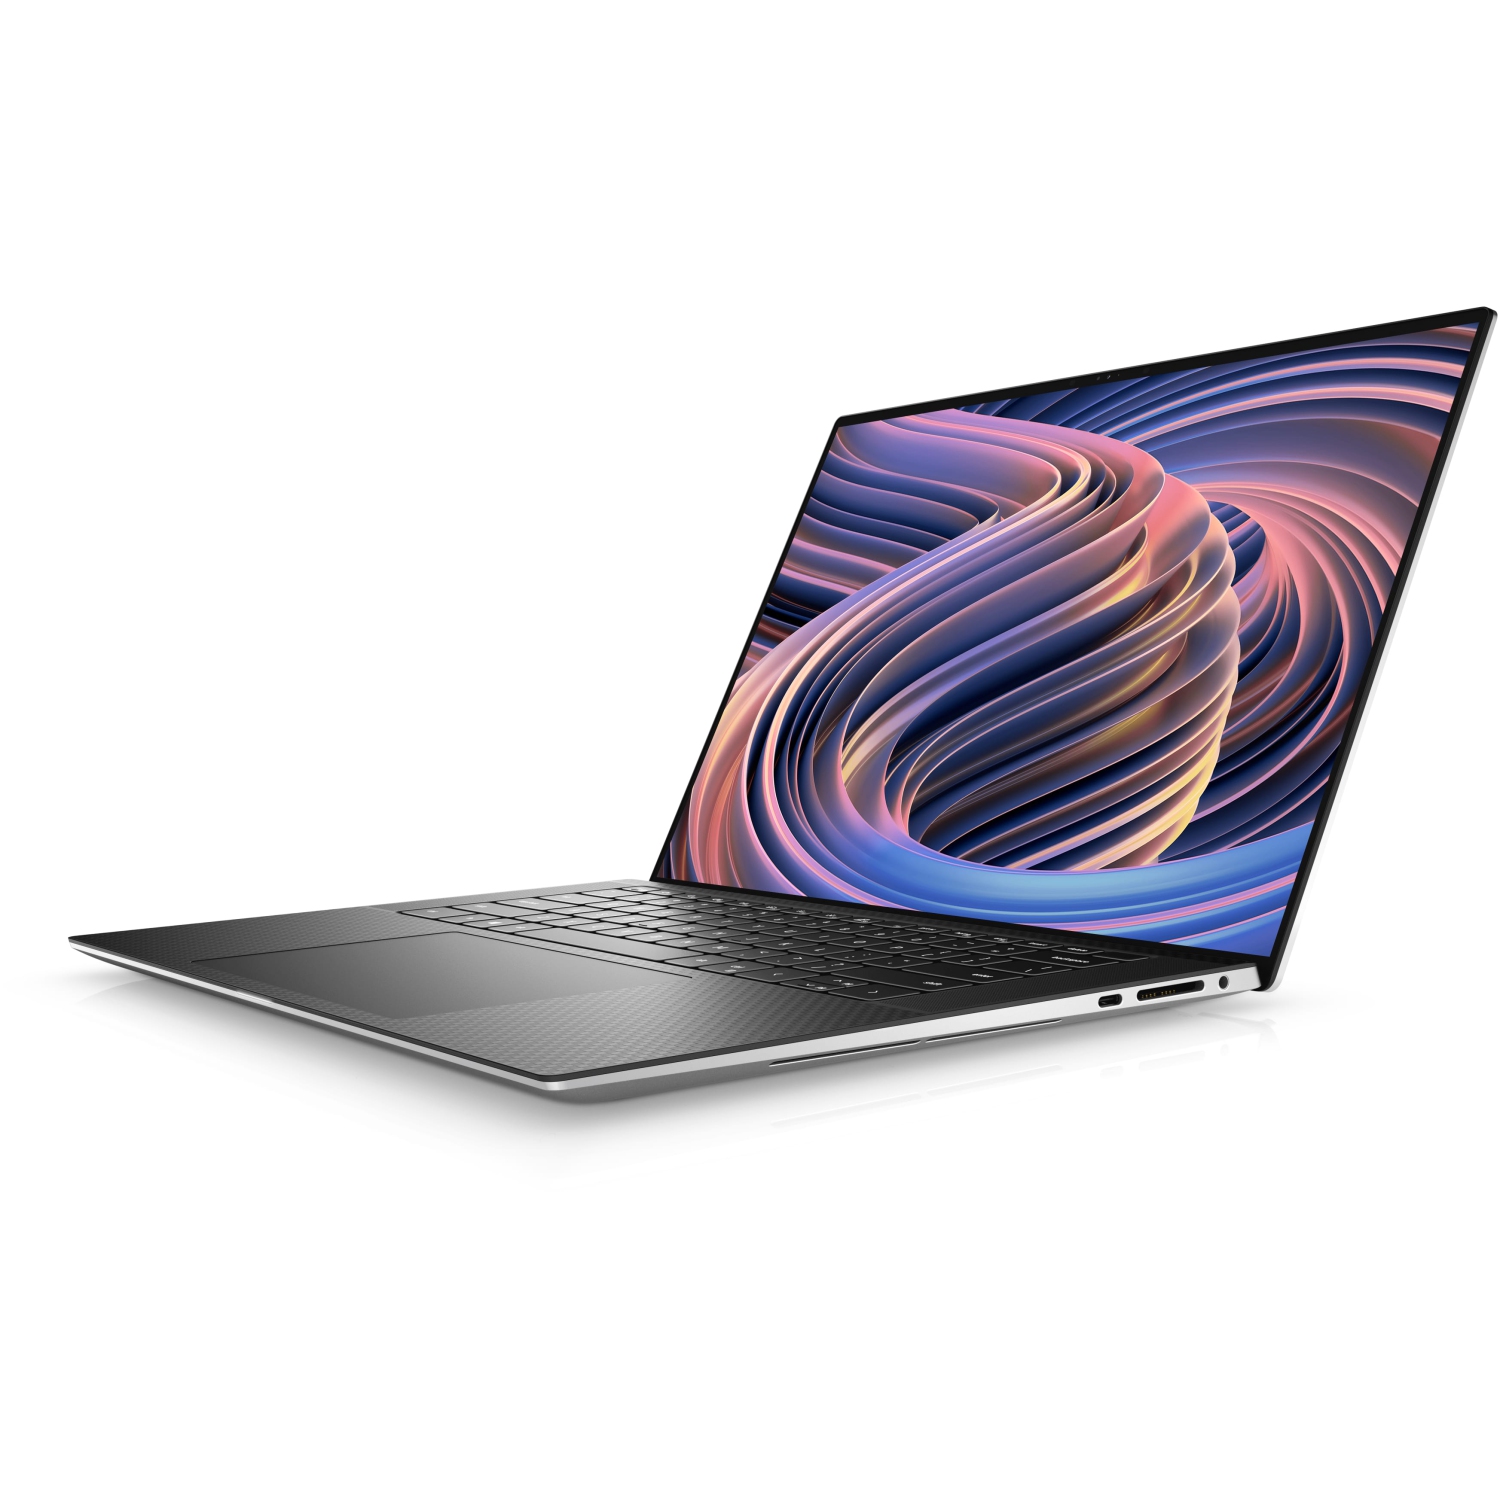 Refurbished (Excellent) – Dell XPS 9520 Laptop (2022) | 15.6" 4K Touch | Core i7 - 2TB SSD - 32GB RAM - RTX 3050 | 14 Cores @ 4.7 GHz - 12th Gen CPU